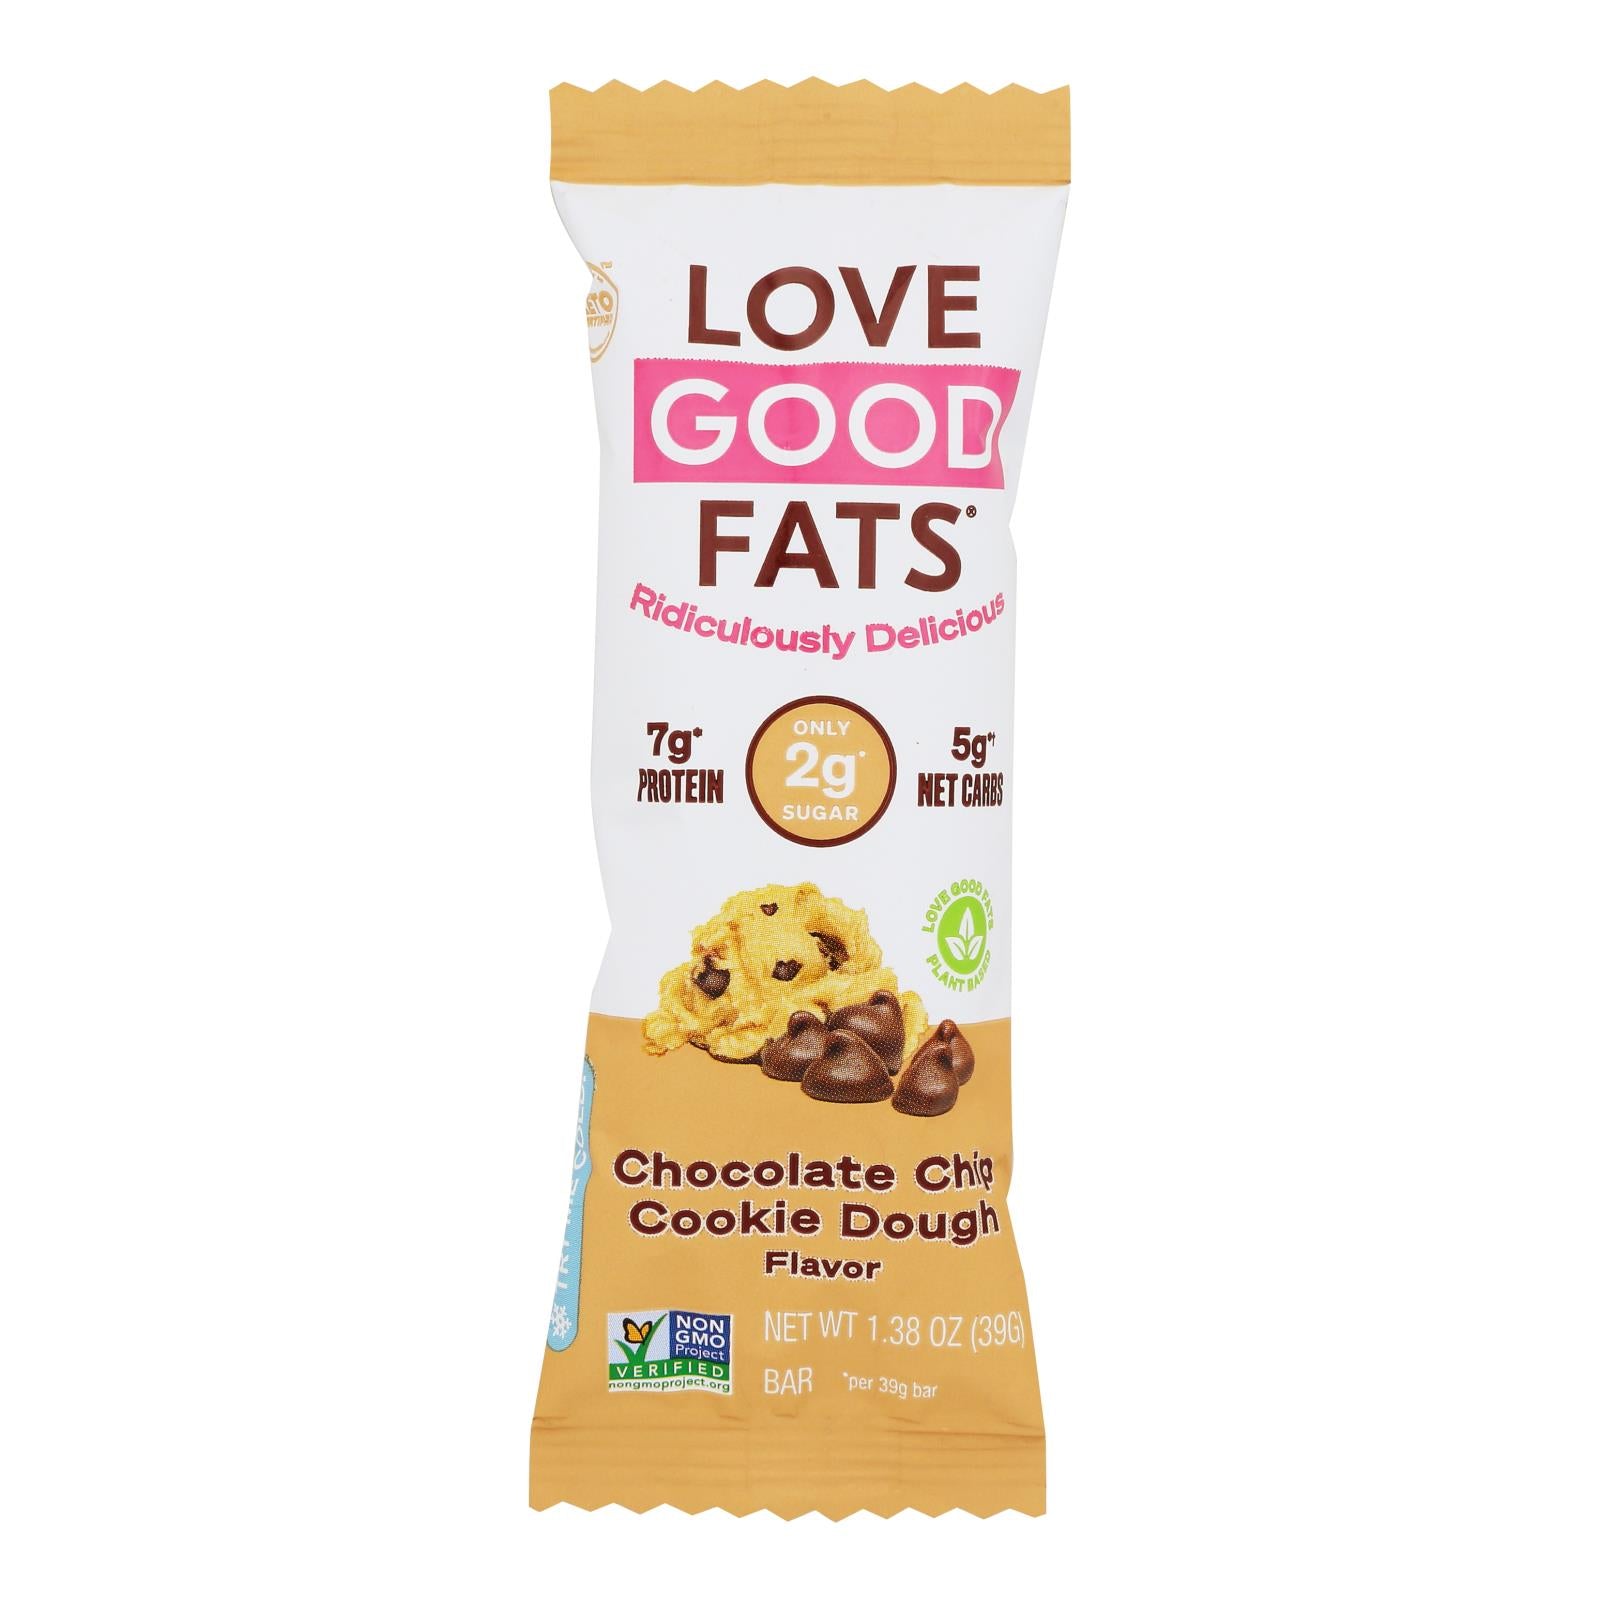 Love Good Fats - Bar Chocolate Chip Cookie Dough - Case of 12 - 1.38 Oz